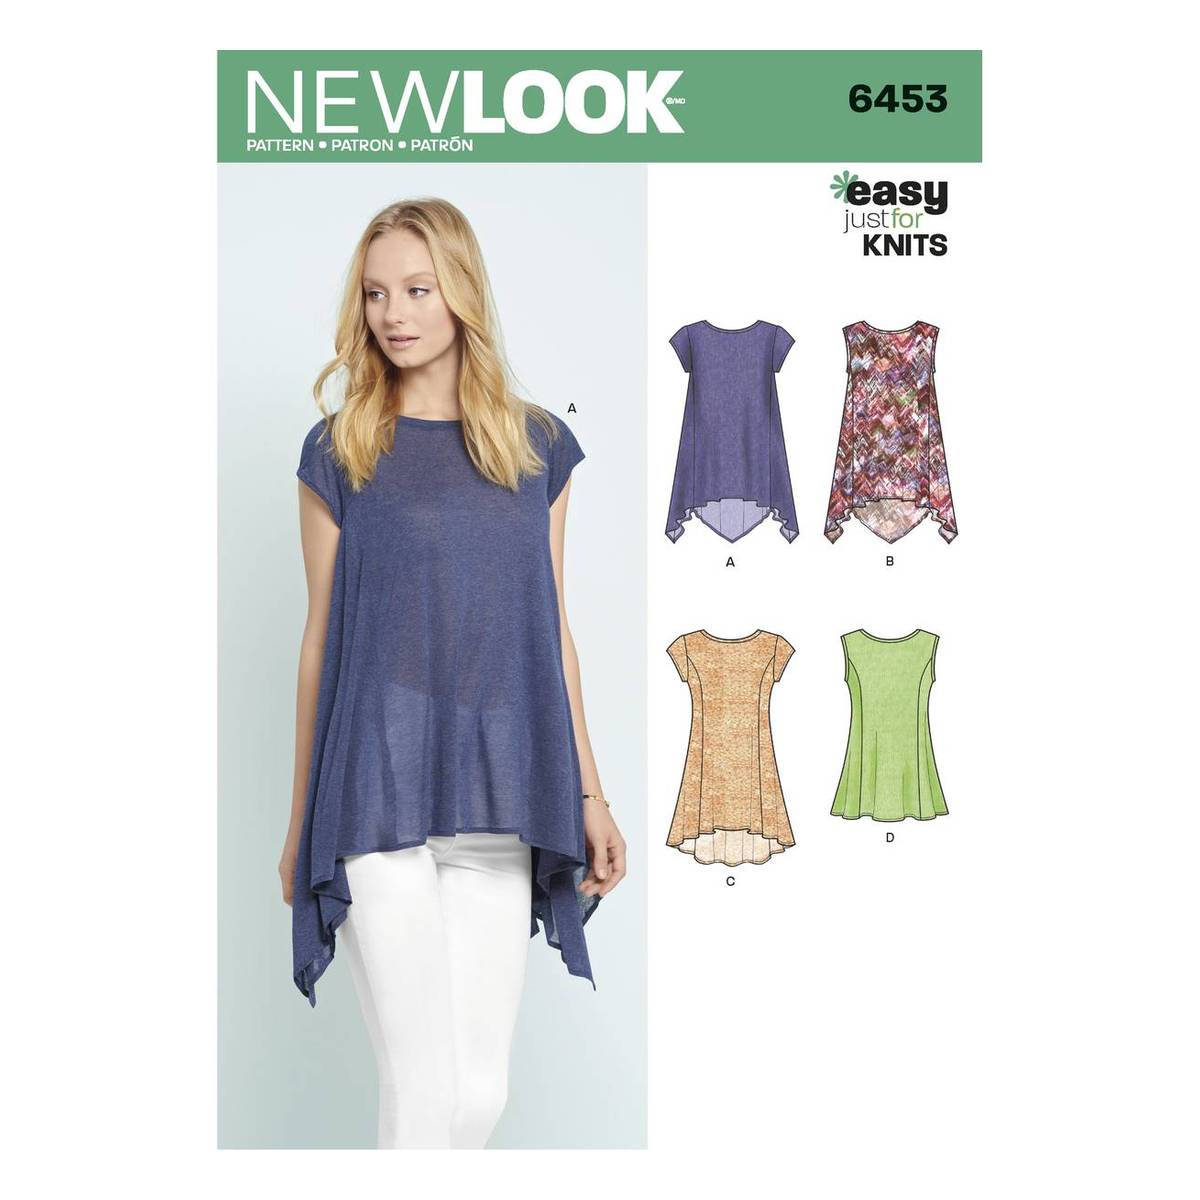 New Look Women's Knit Tops Sewing Pattern 6453 | Hobbycraft